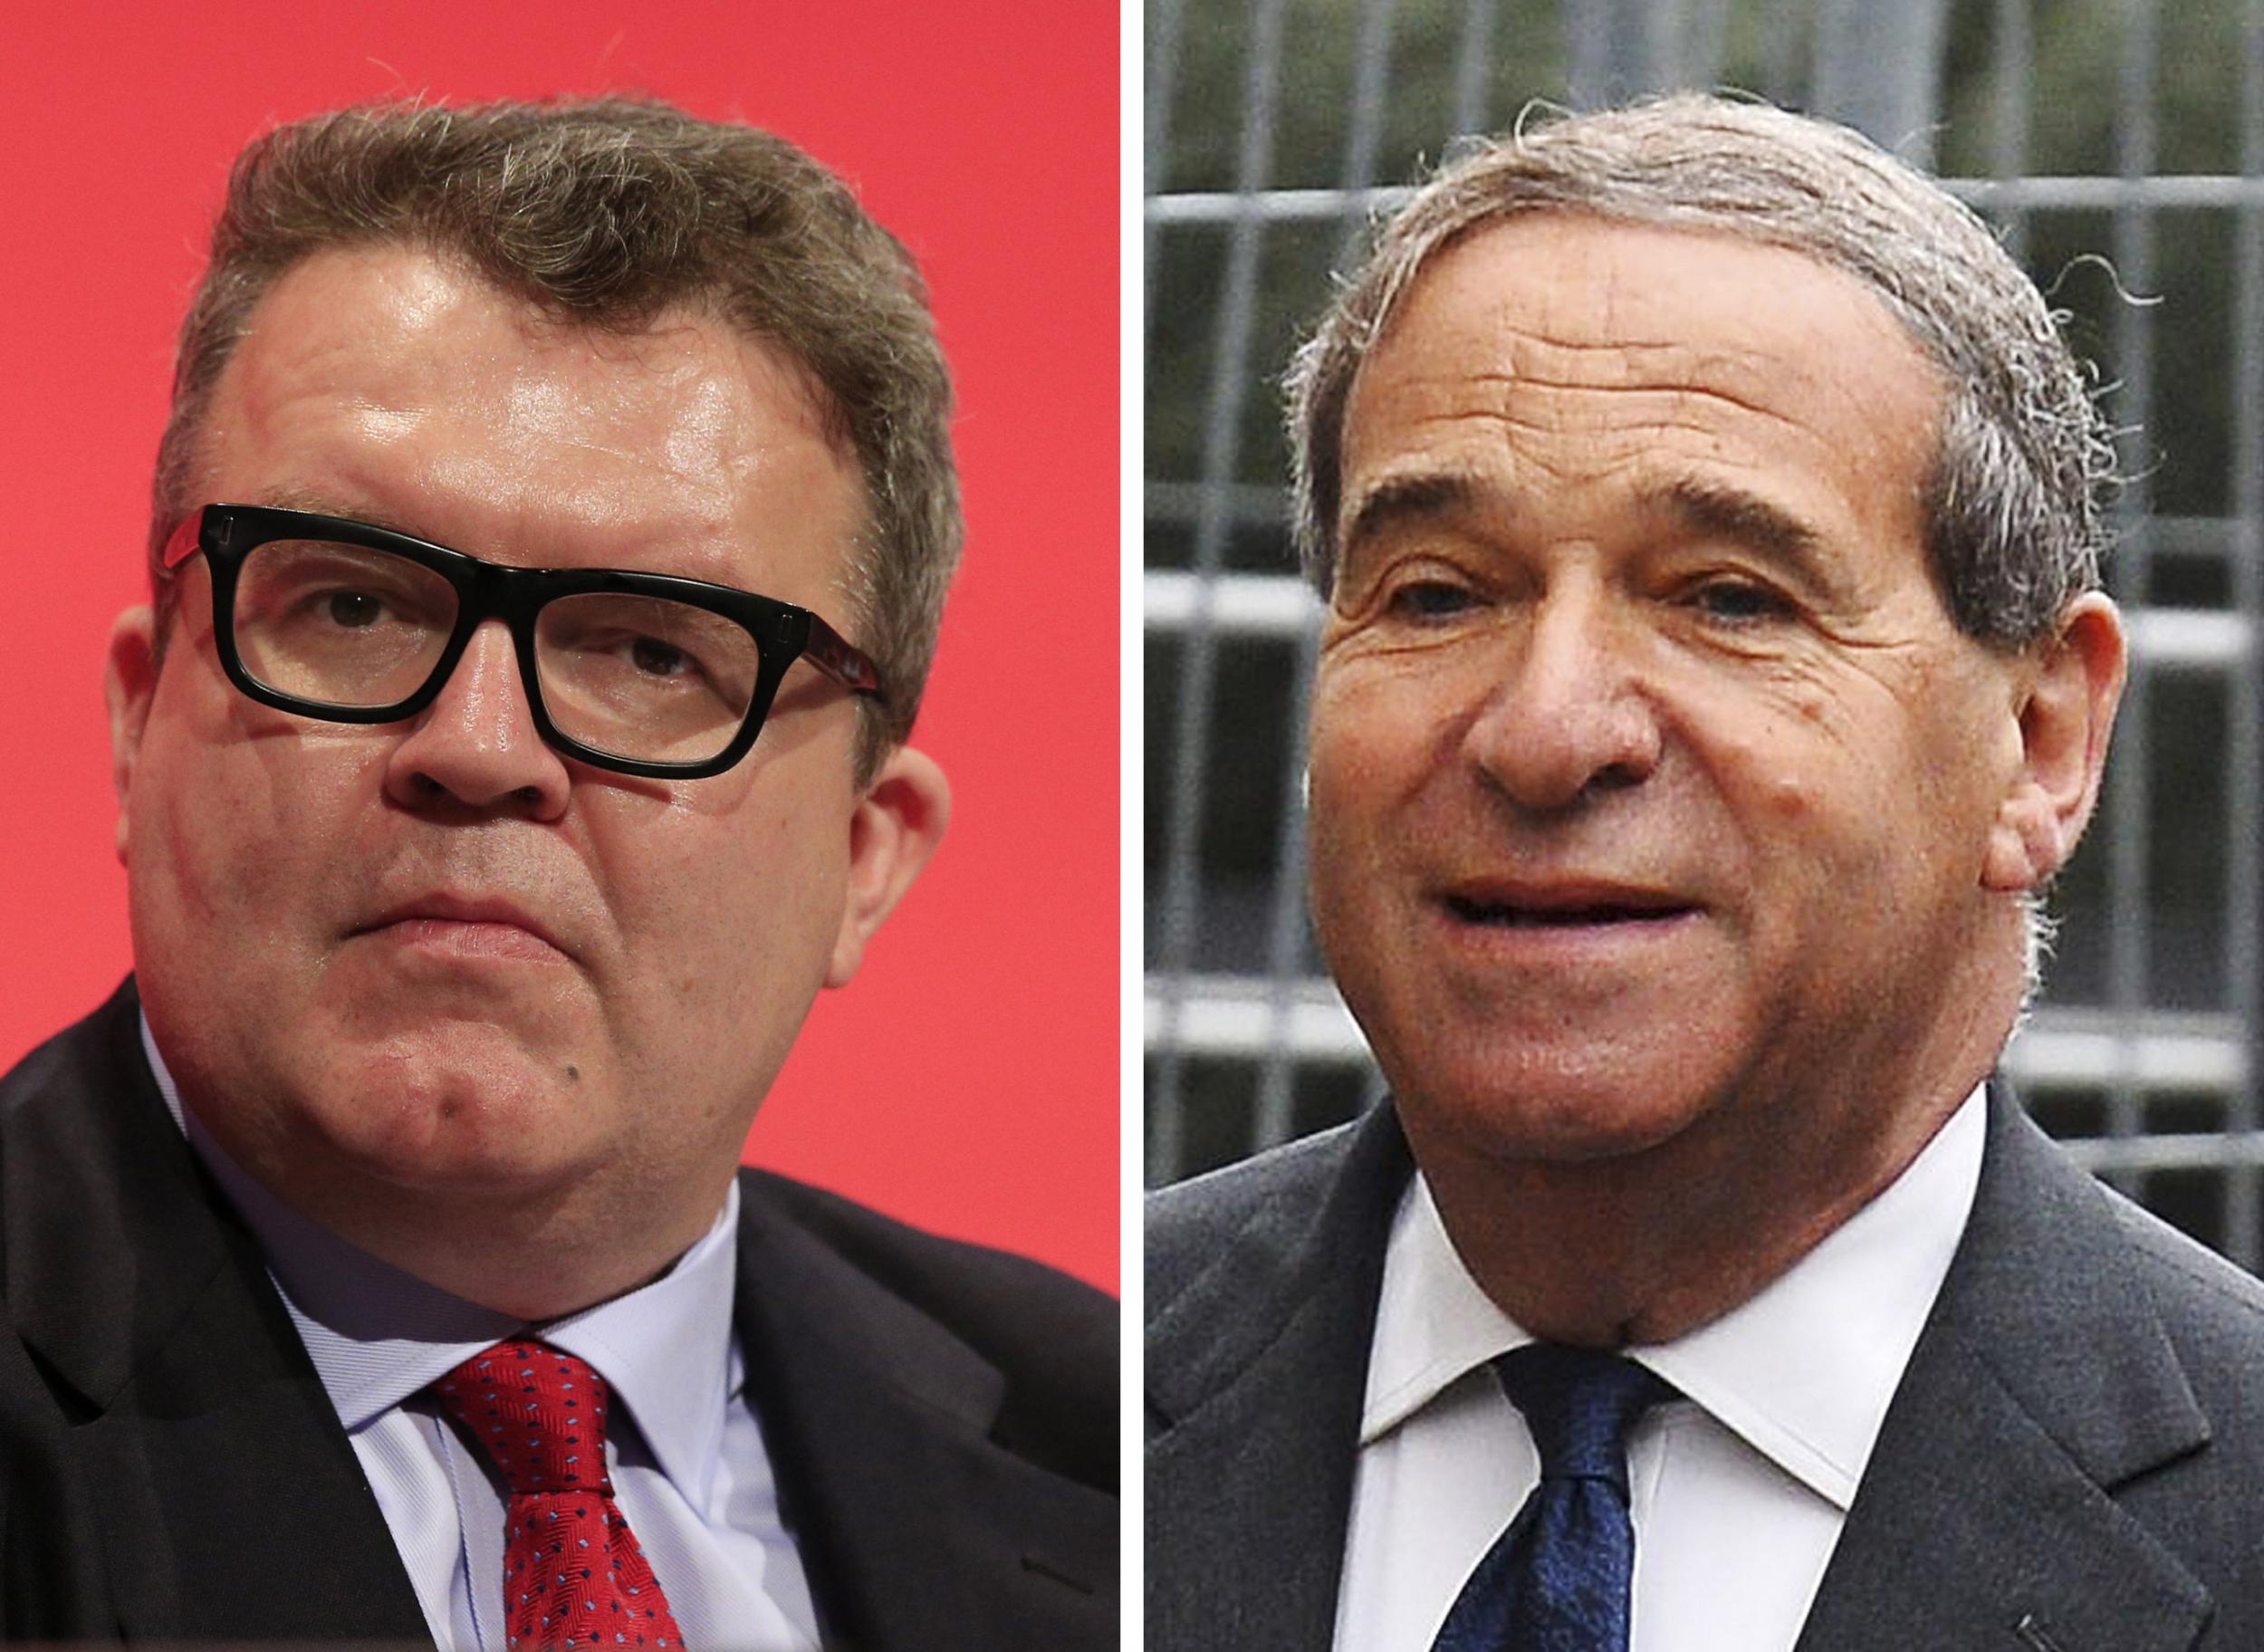 Tom Watson repeated a comment from an alleged sex abuse survivor that the late peer was 'close to evil'